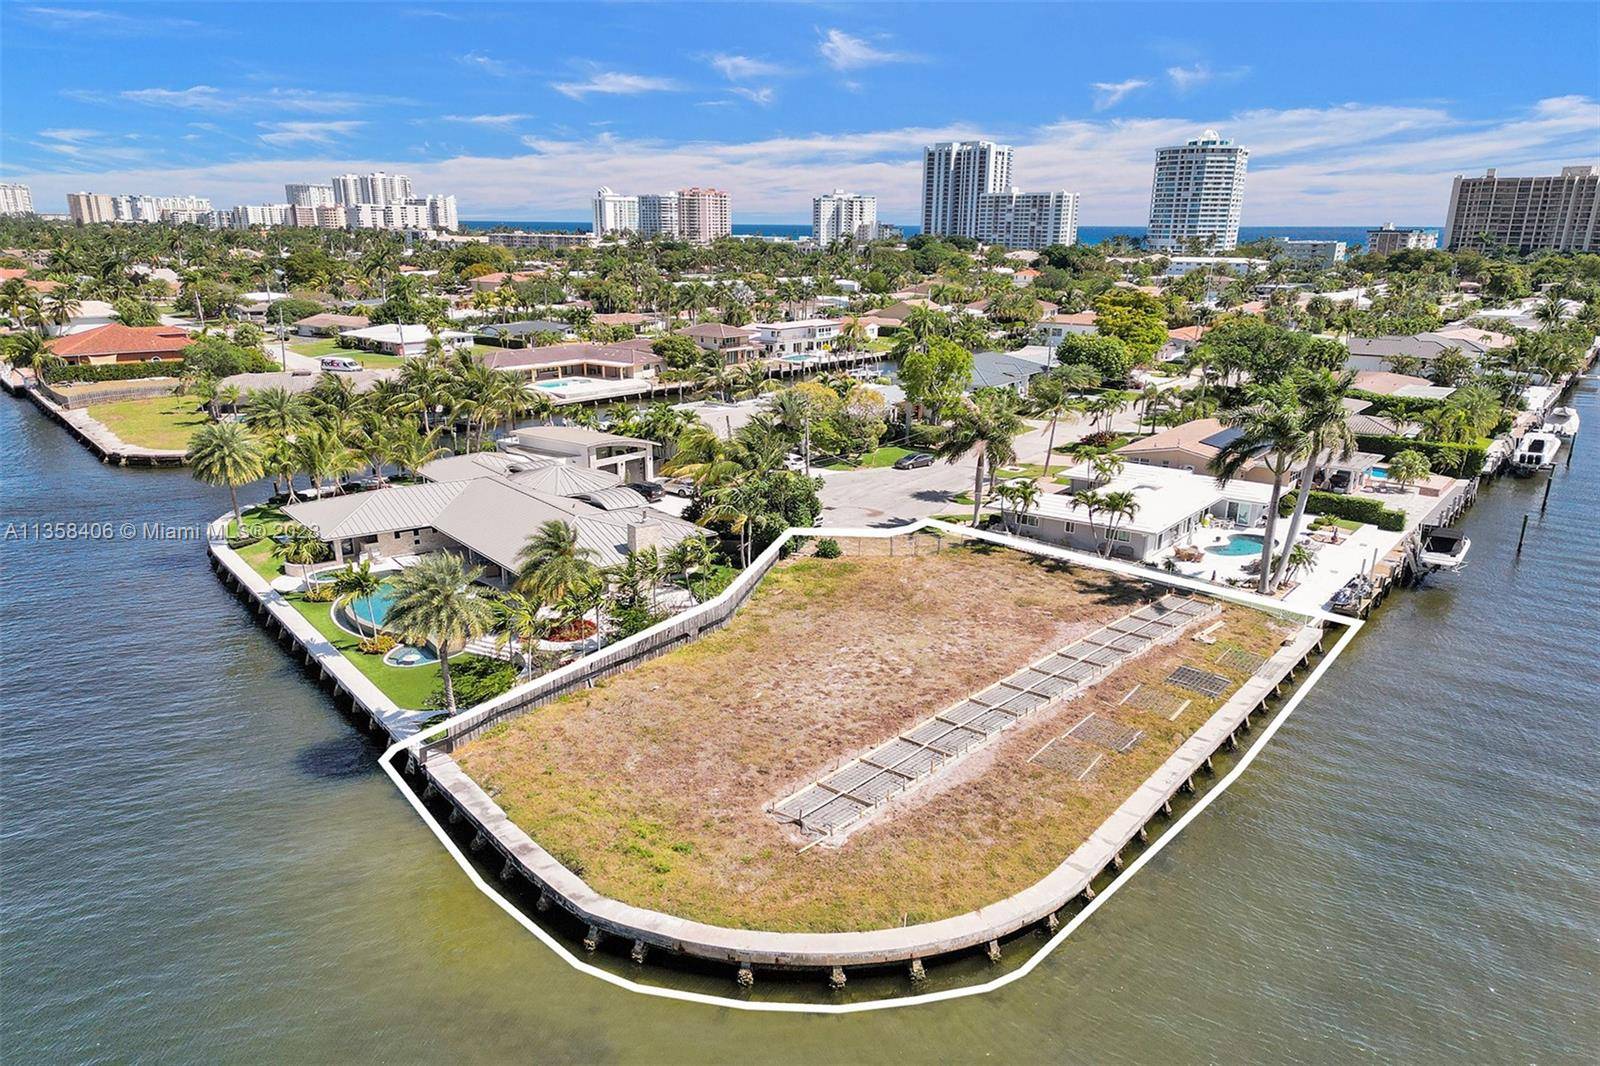 MASTER BROKER LISTING SELLER FINANCING AVAILABLE VACANT INTRACOASTAL POINT LOT WITH 255 FEET OF WRAP AROUND FRONTAGE, ACROSS FROM BAY COLONY.